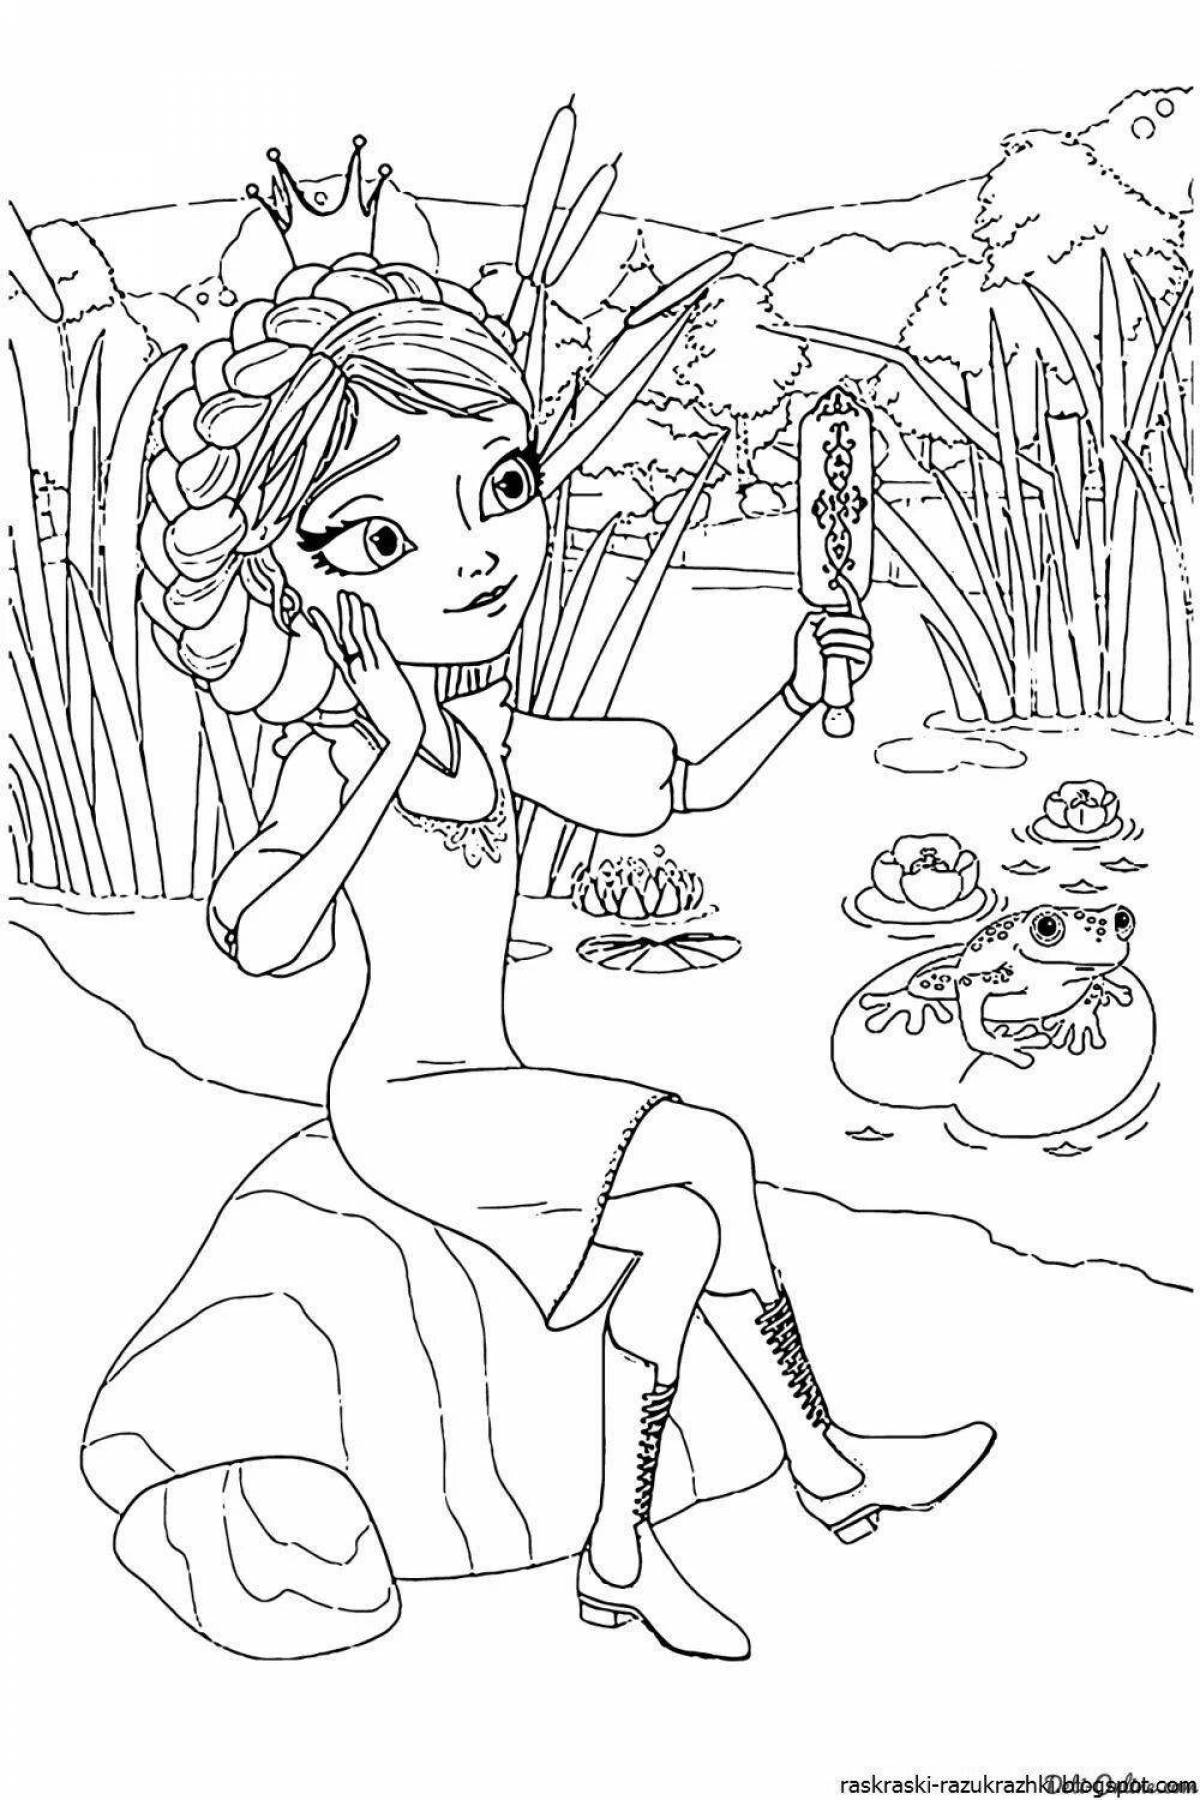 Princess marlene's colorful coloring page